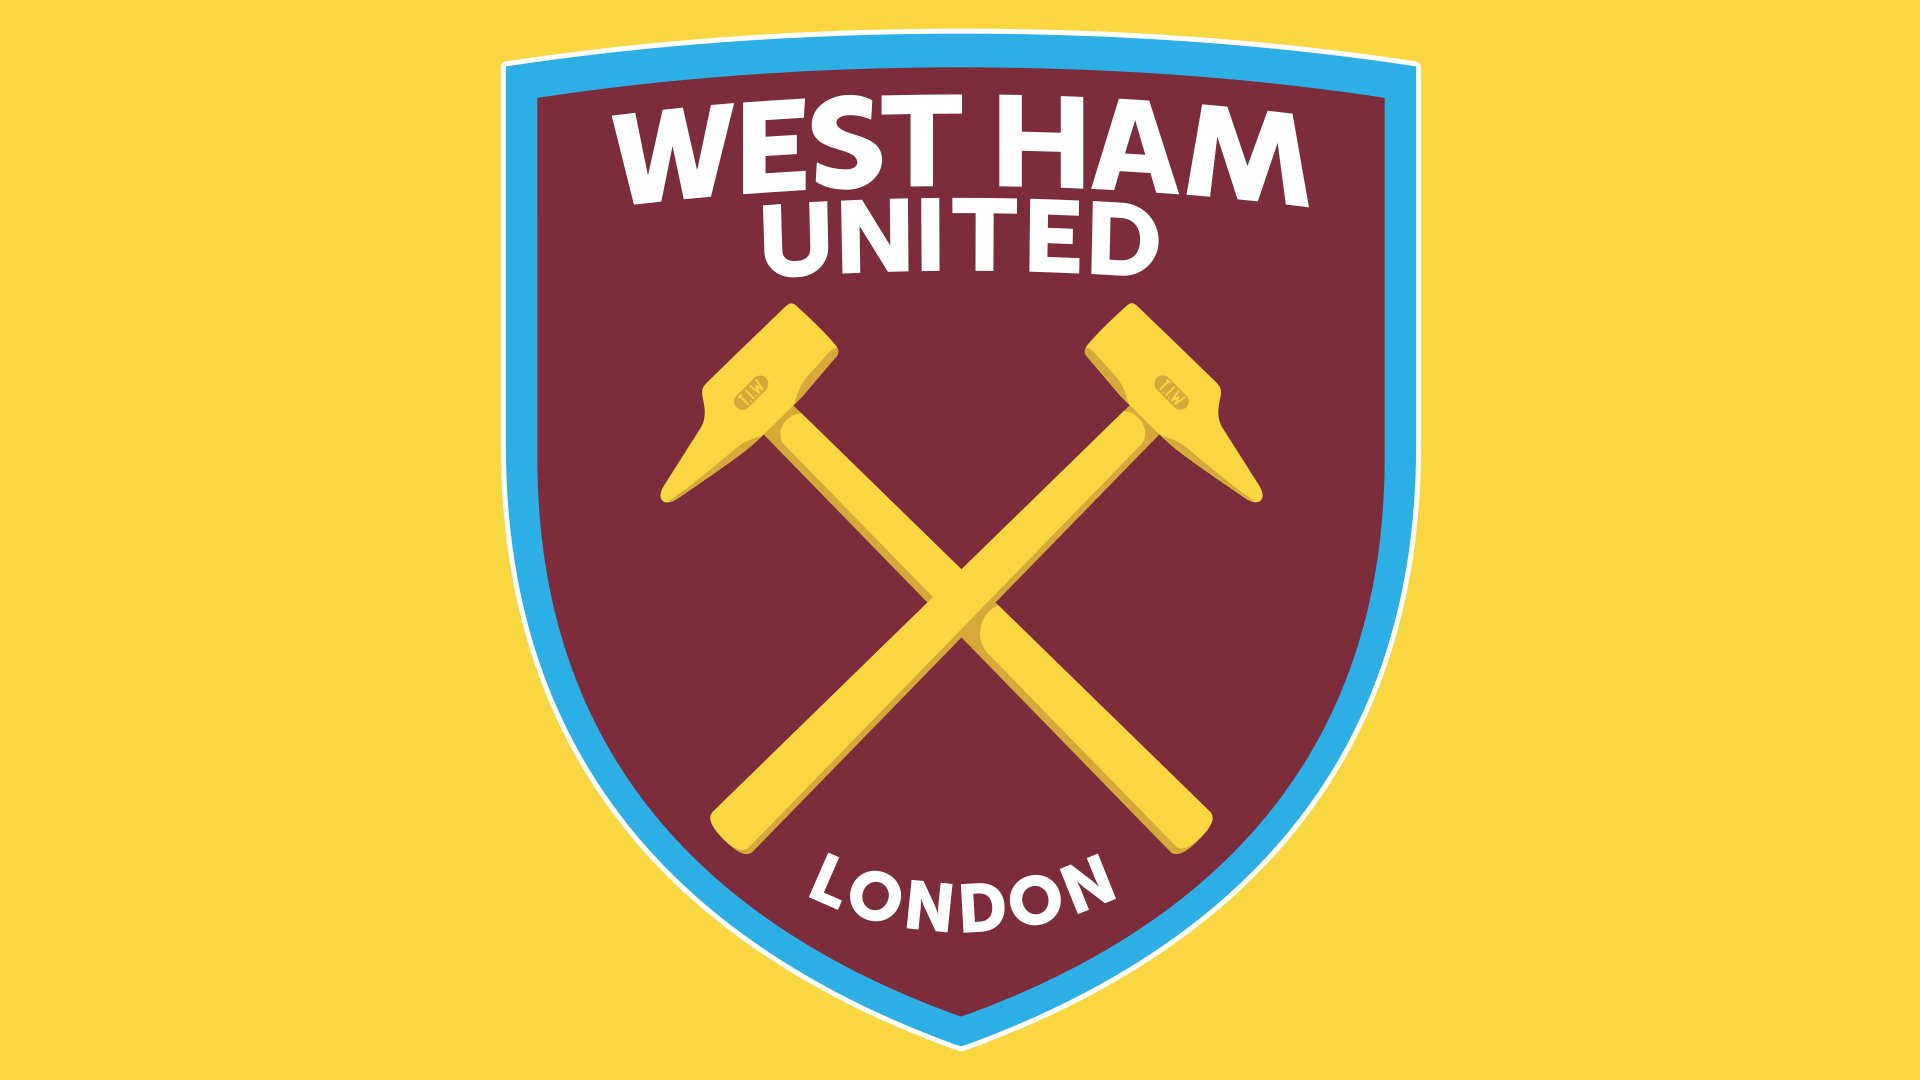 Meaning West Ham United logo and symbol | history and evolution1920 x 1080